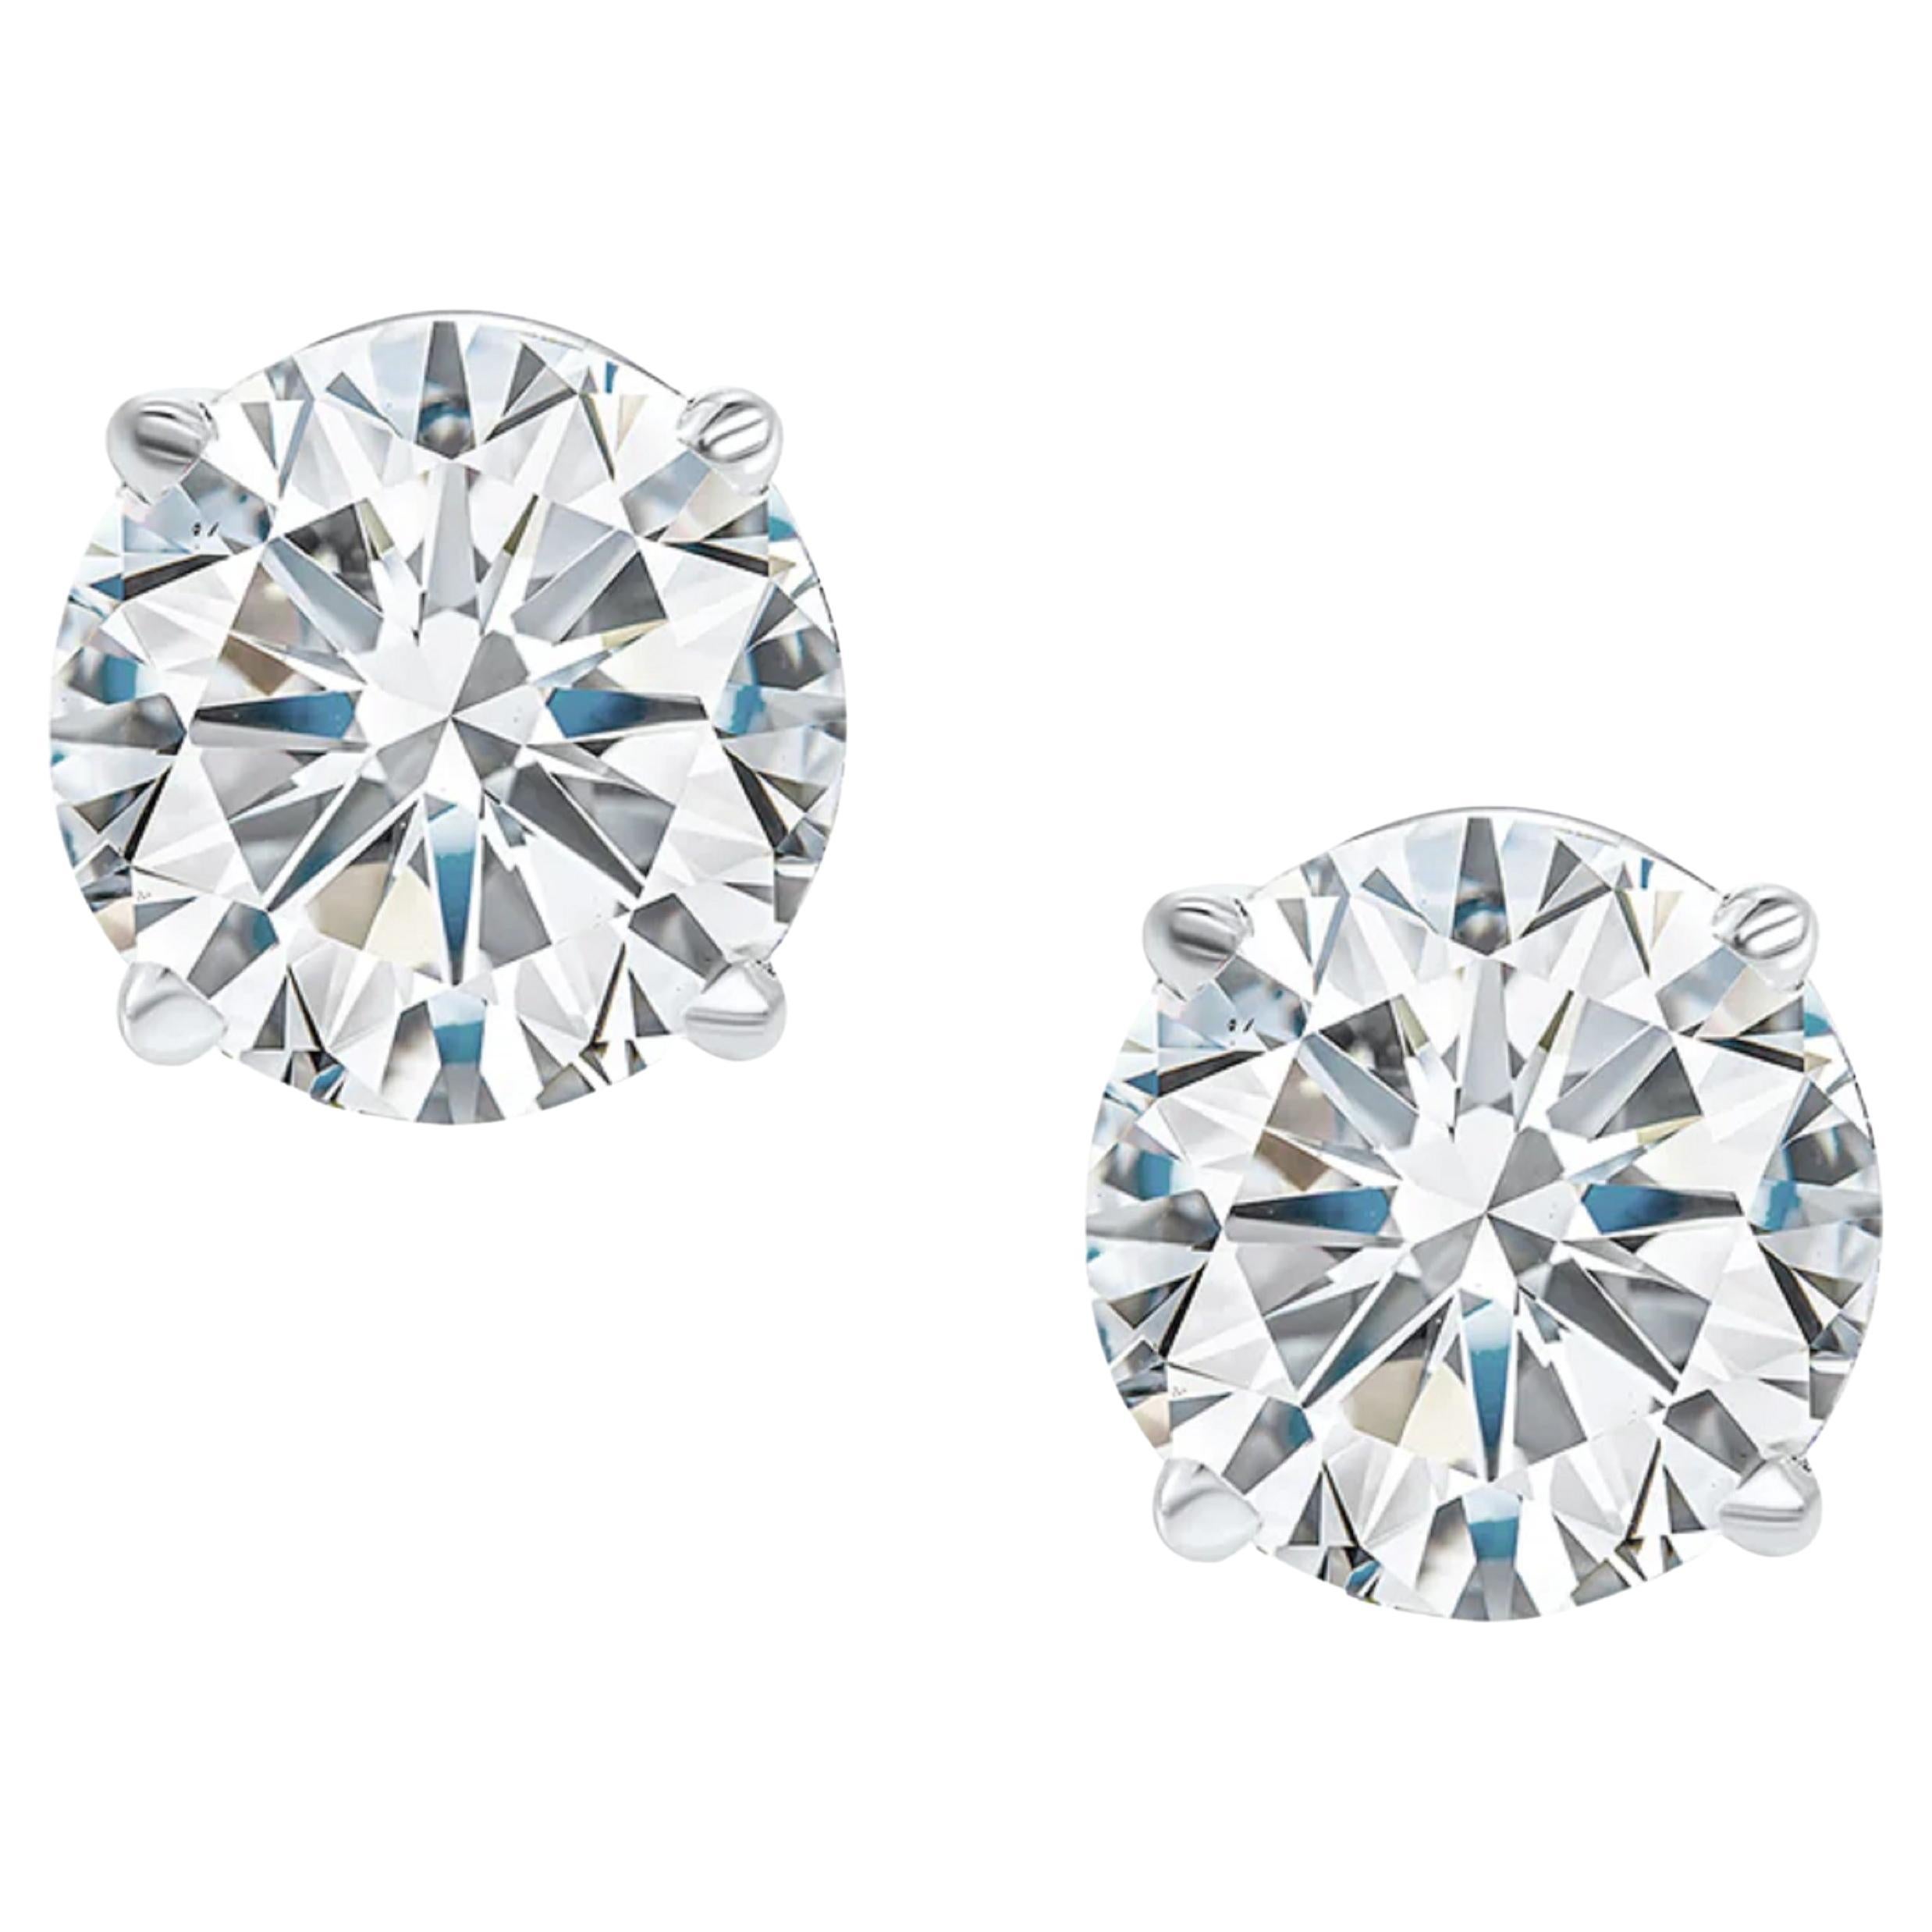 7 Carat Matched Pair of Round Cut Diamonds set in solid Platinum For Sale